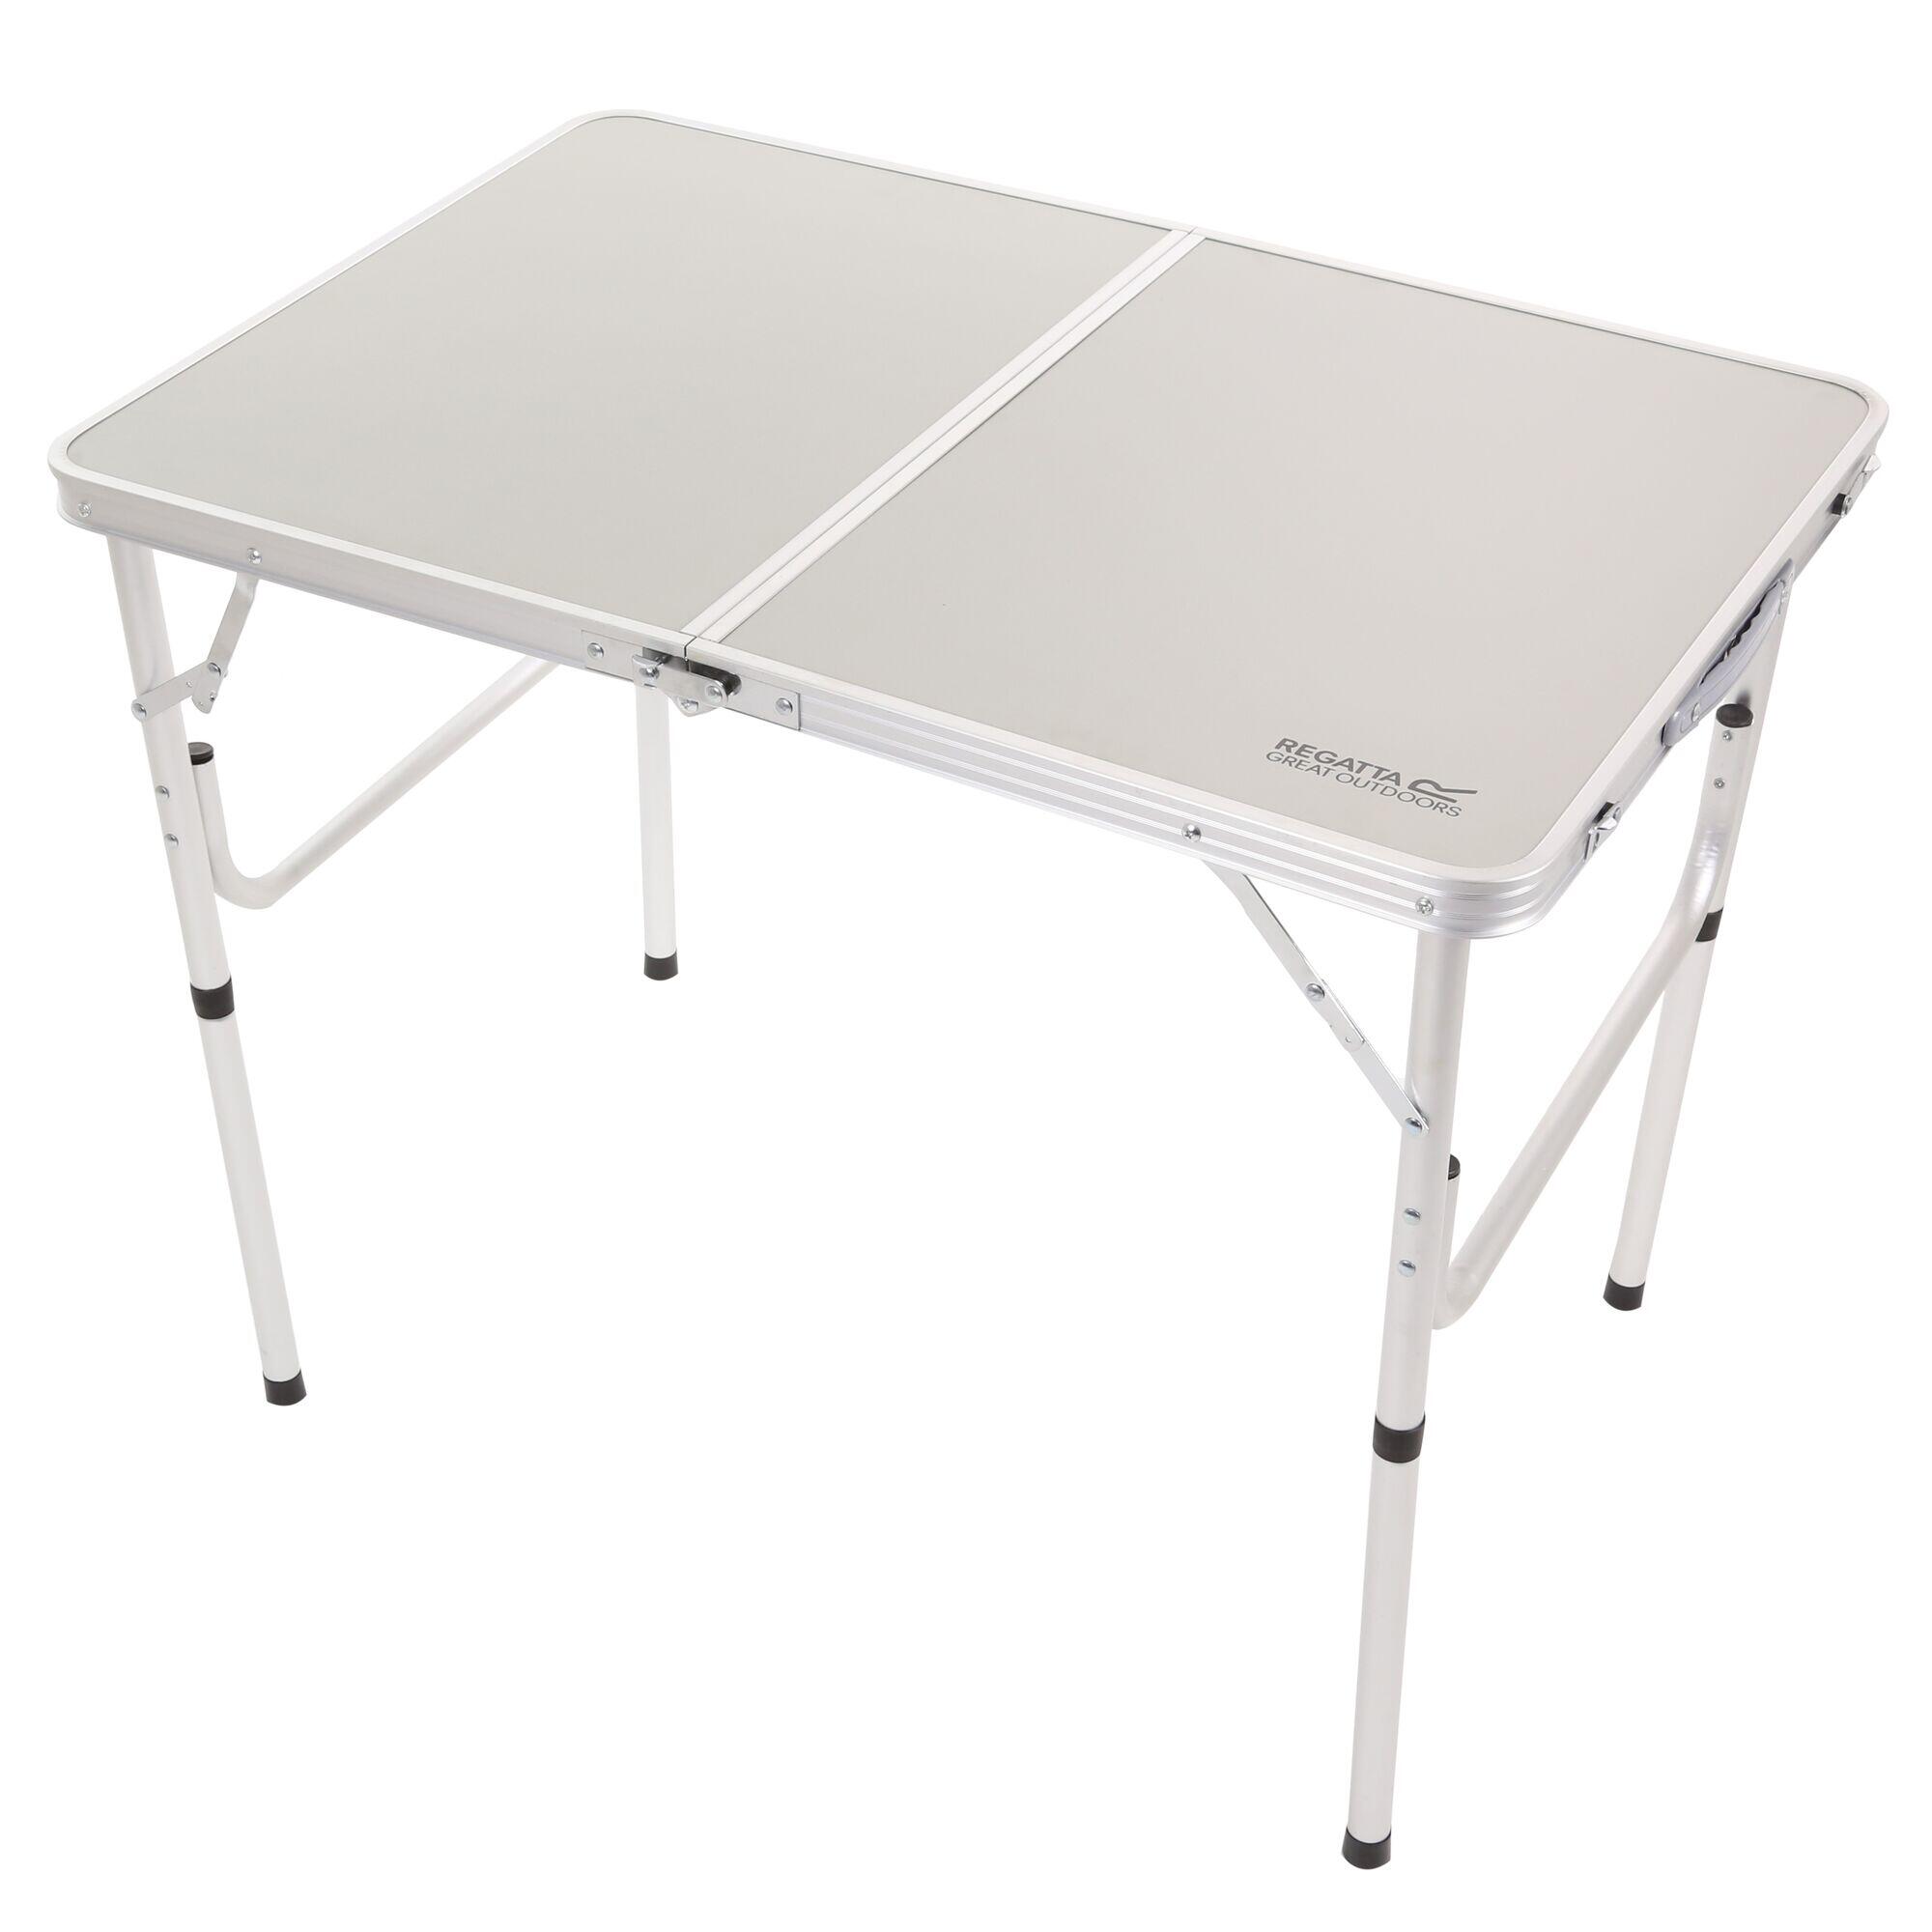 Cena Adults' Camping Table - Grey 1/5